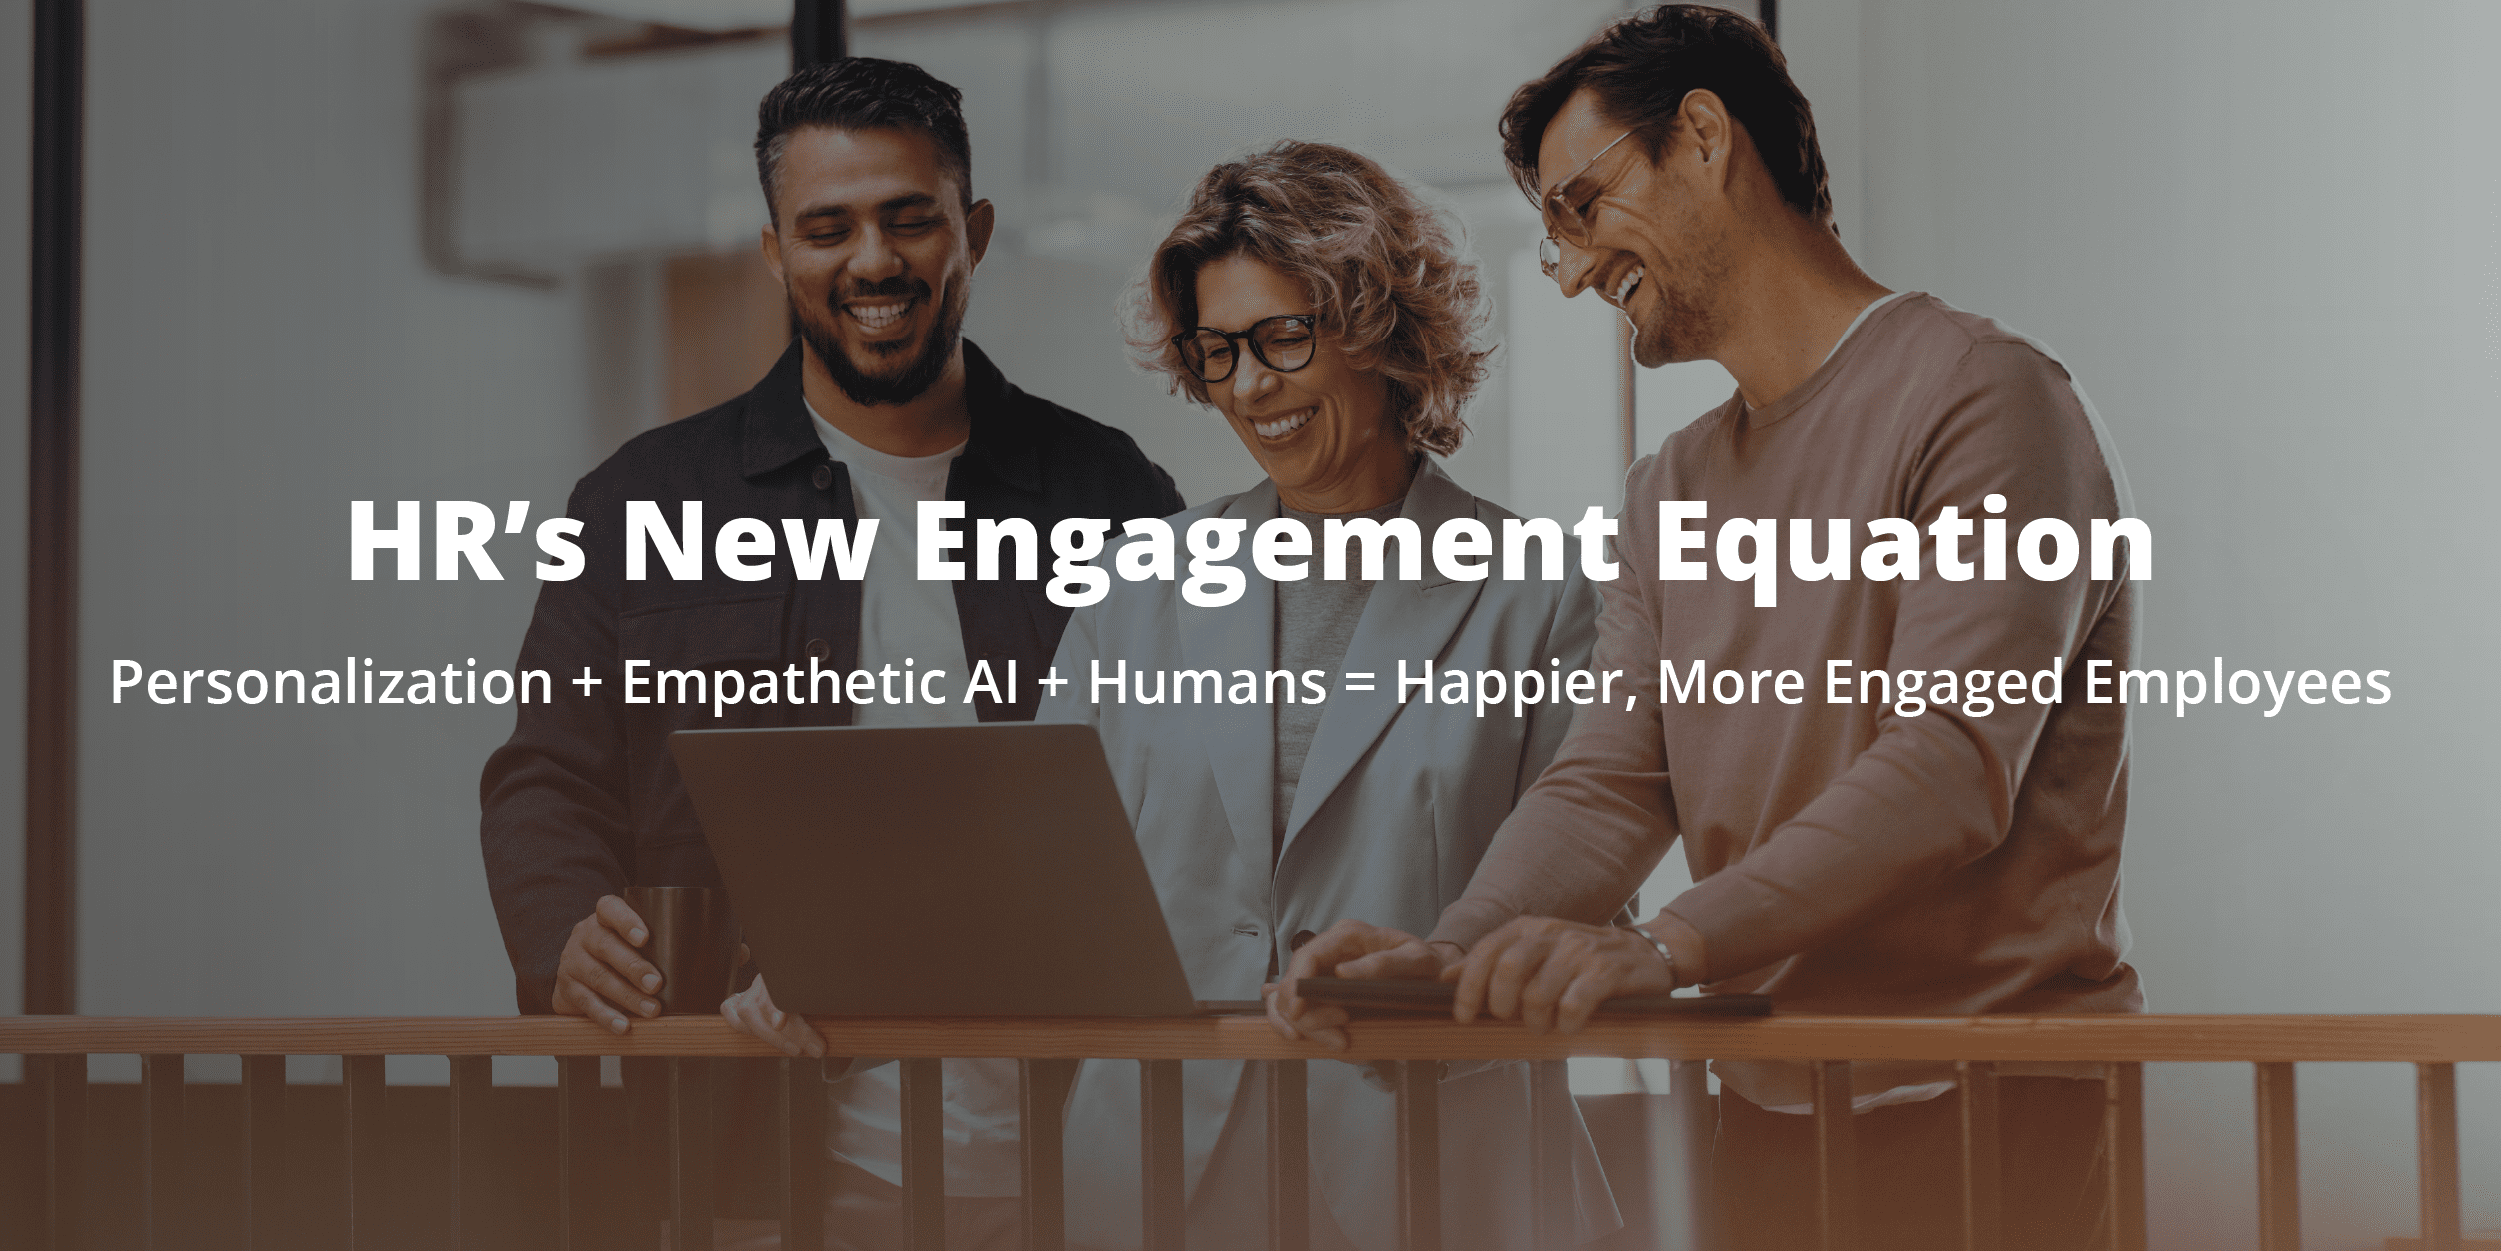 HR's New Engagement Equation. Personalization + Empathetic AI + Huamns = Happier, More Engaged Employees